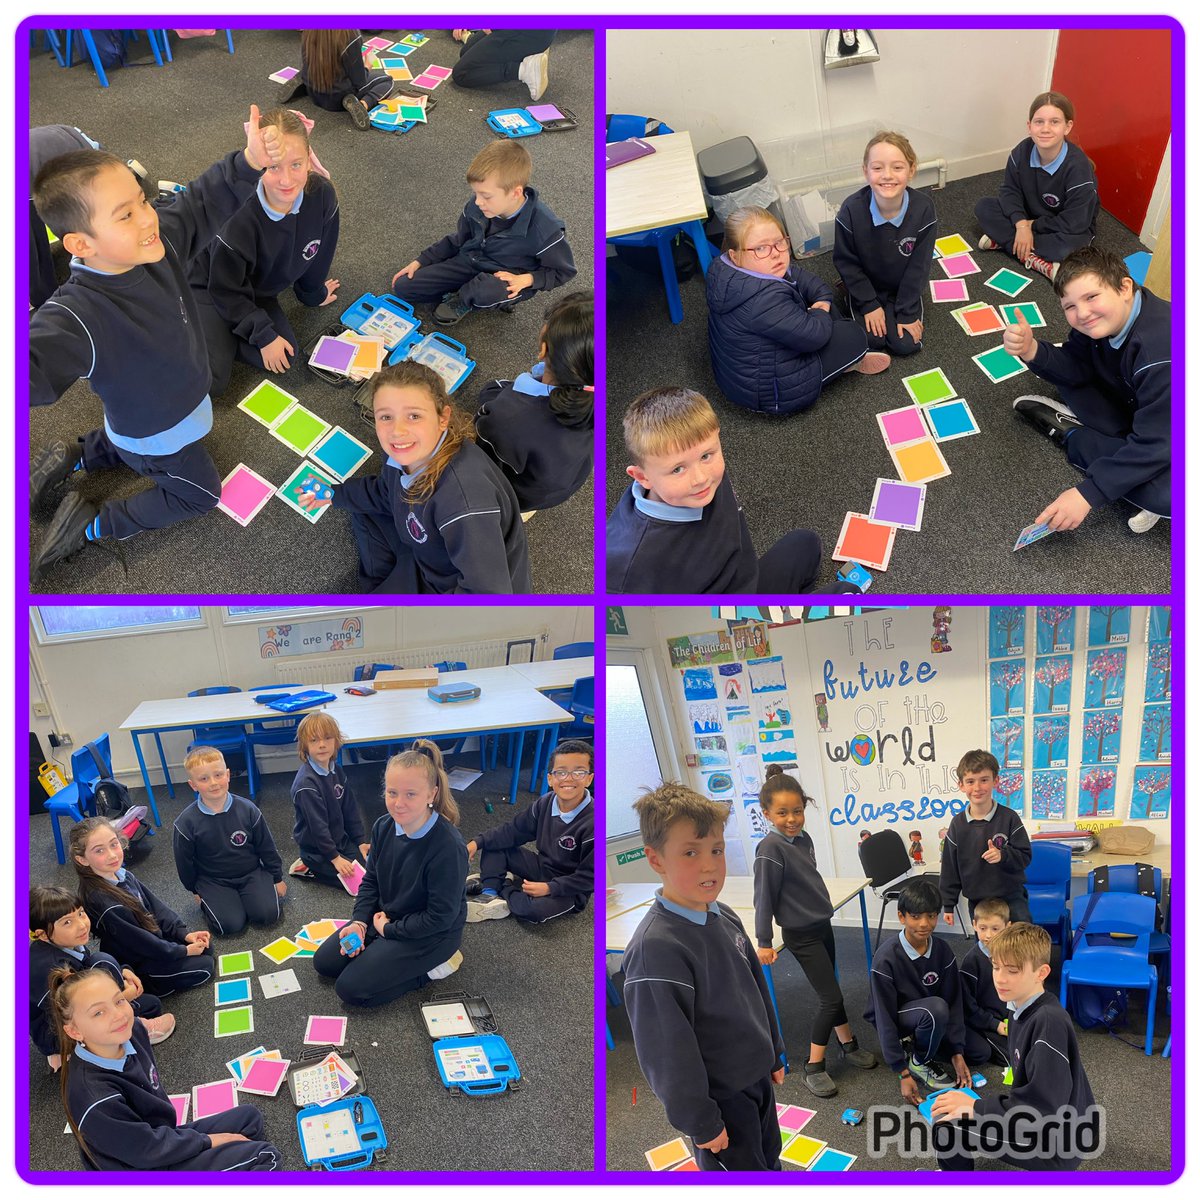 GRMA 5th class for their fantastic robots display to 2nd class this morning. We can not wait to use them and start creating and coding new paths for the robotic cars #STEM #Coding